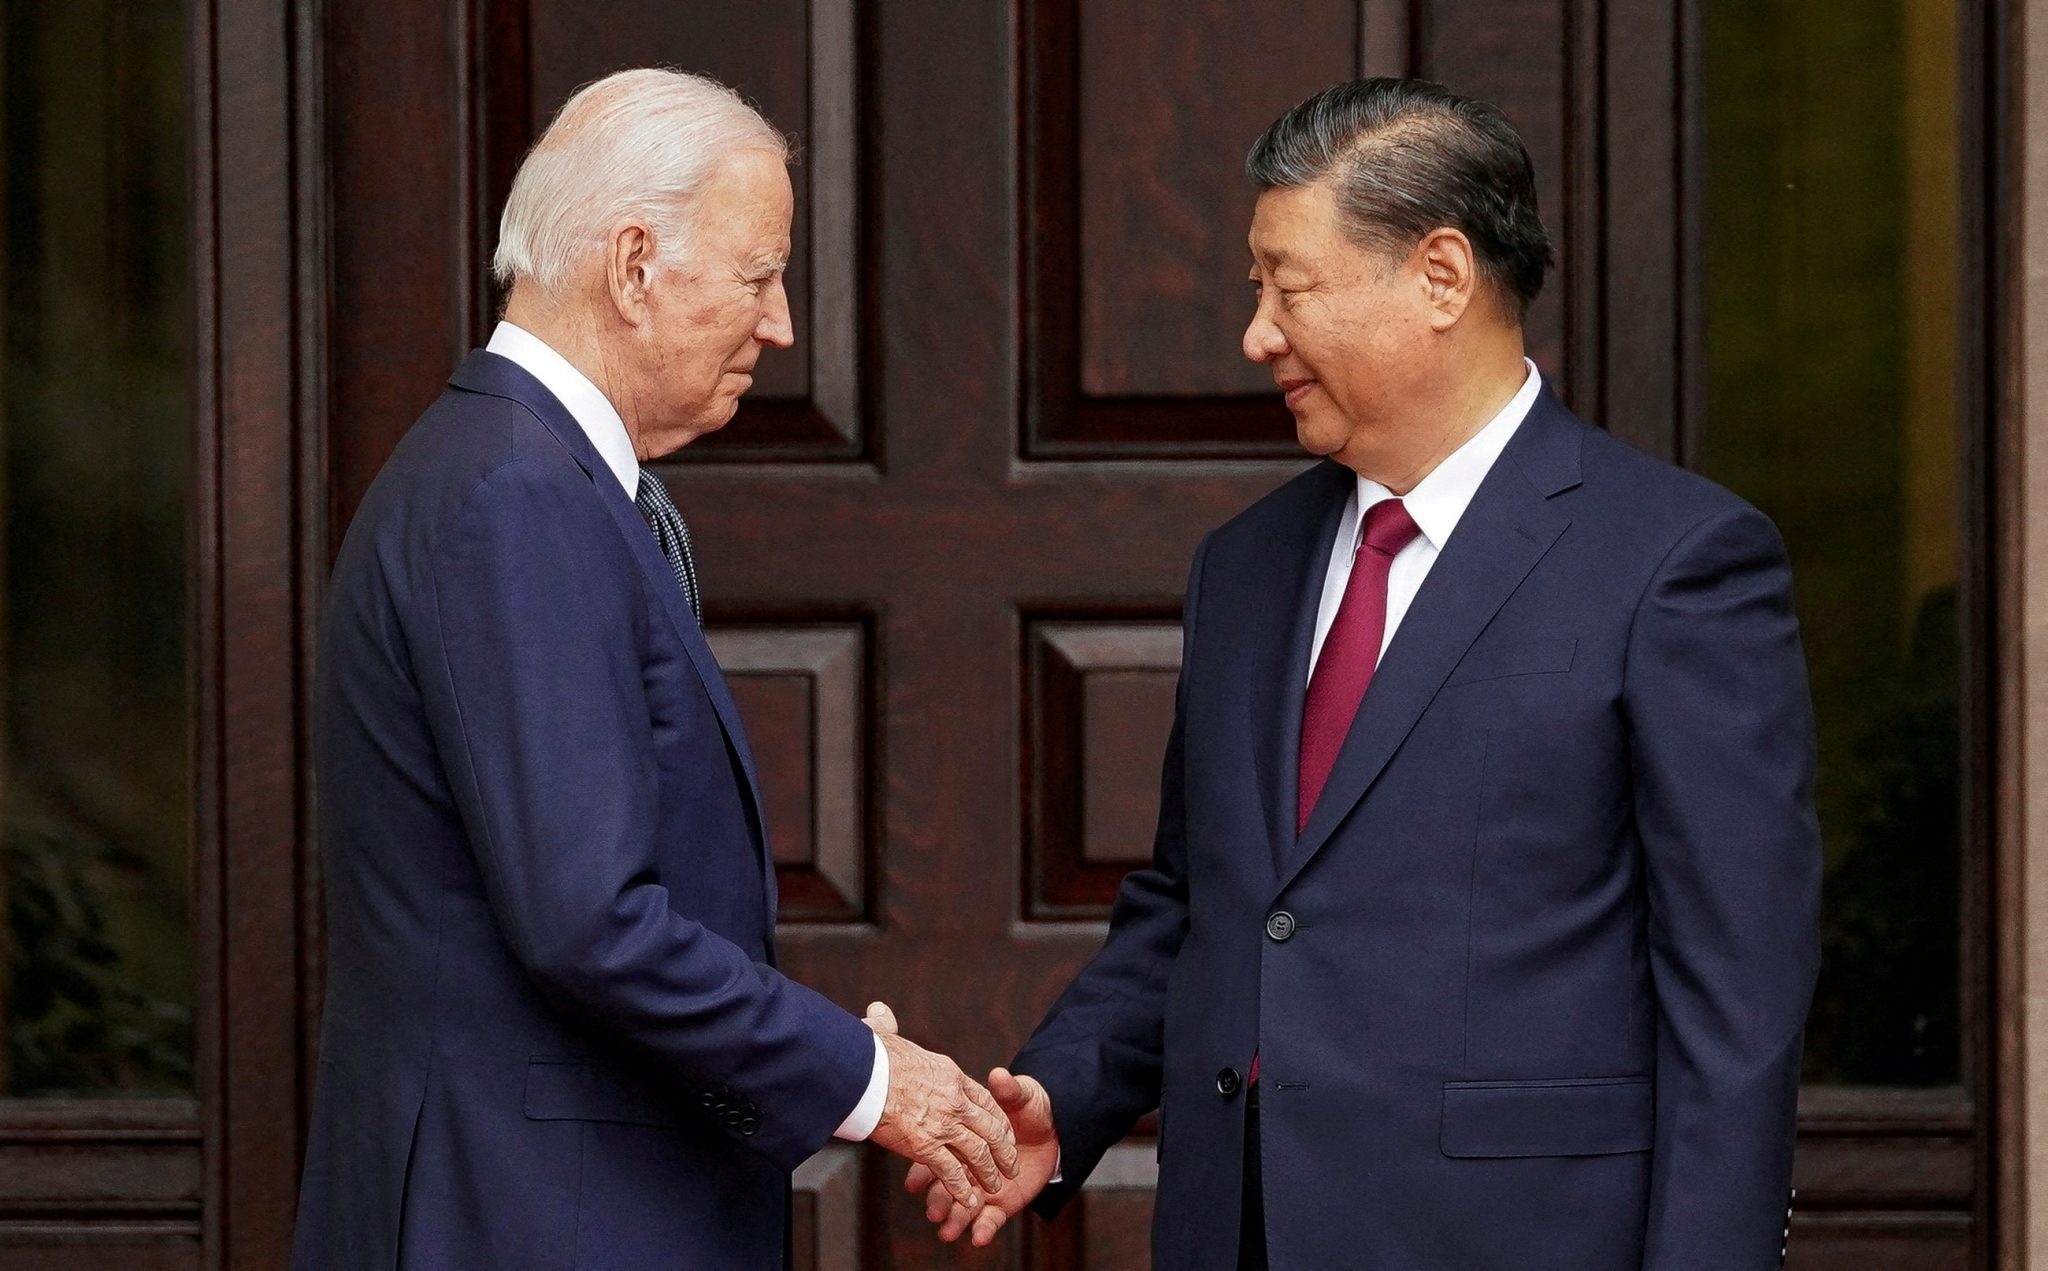 US President Joe Biden shakes hands with Chinese President Xi Jinping at Filoli estate on the sidelines of the Asia-Pacific Economic Cooperation (APEC) summit, in Woodside, California, U.S., 15 November 2023. (Photo: REUTERS/Kevin Lamarque)